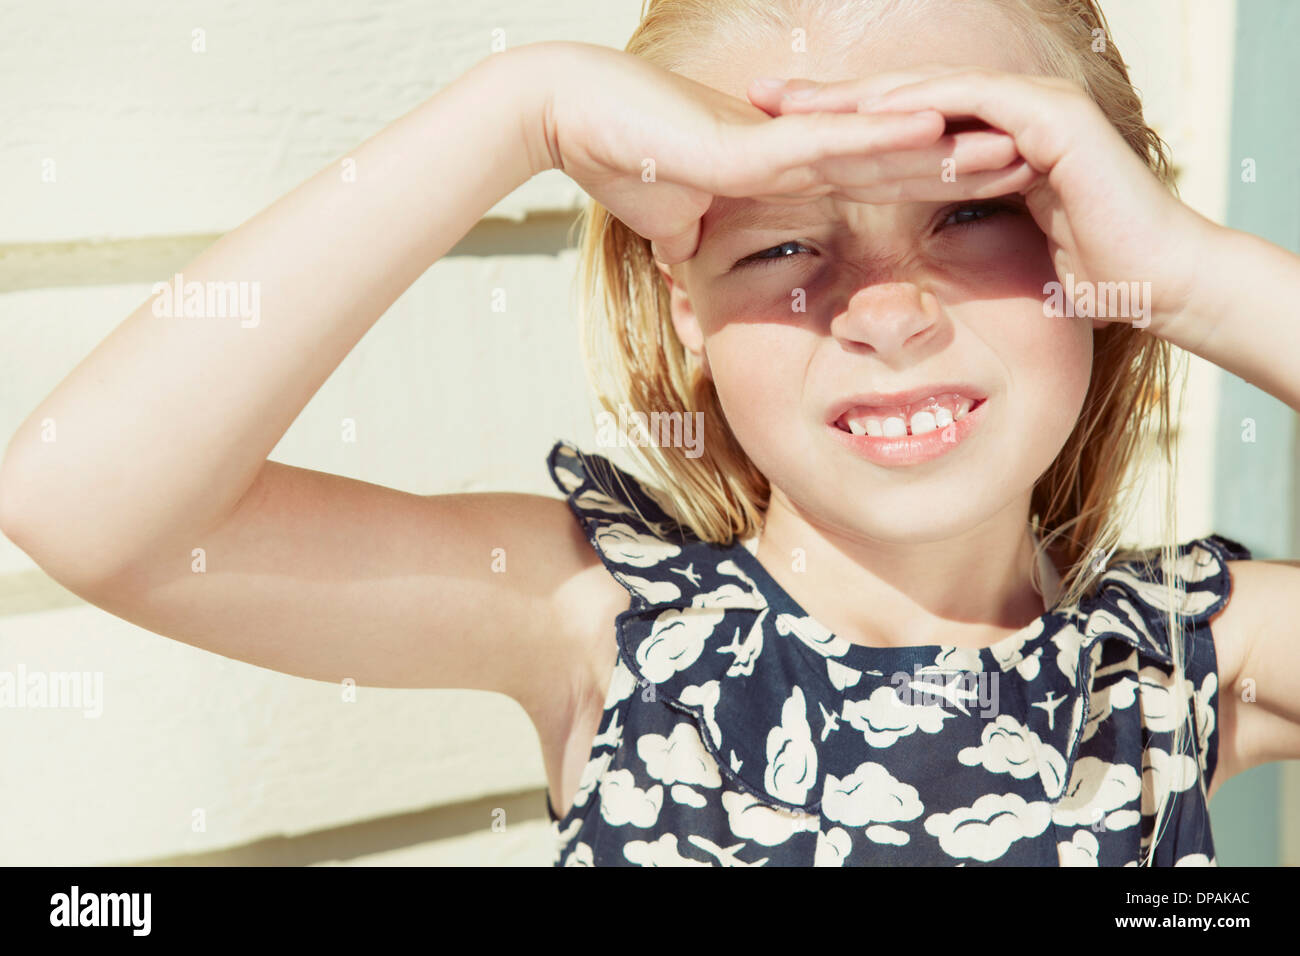 Child covering her eyes from sun glare Stock Photo